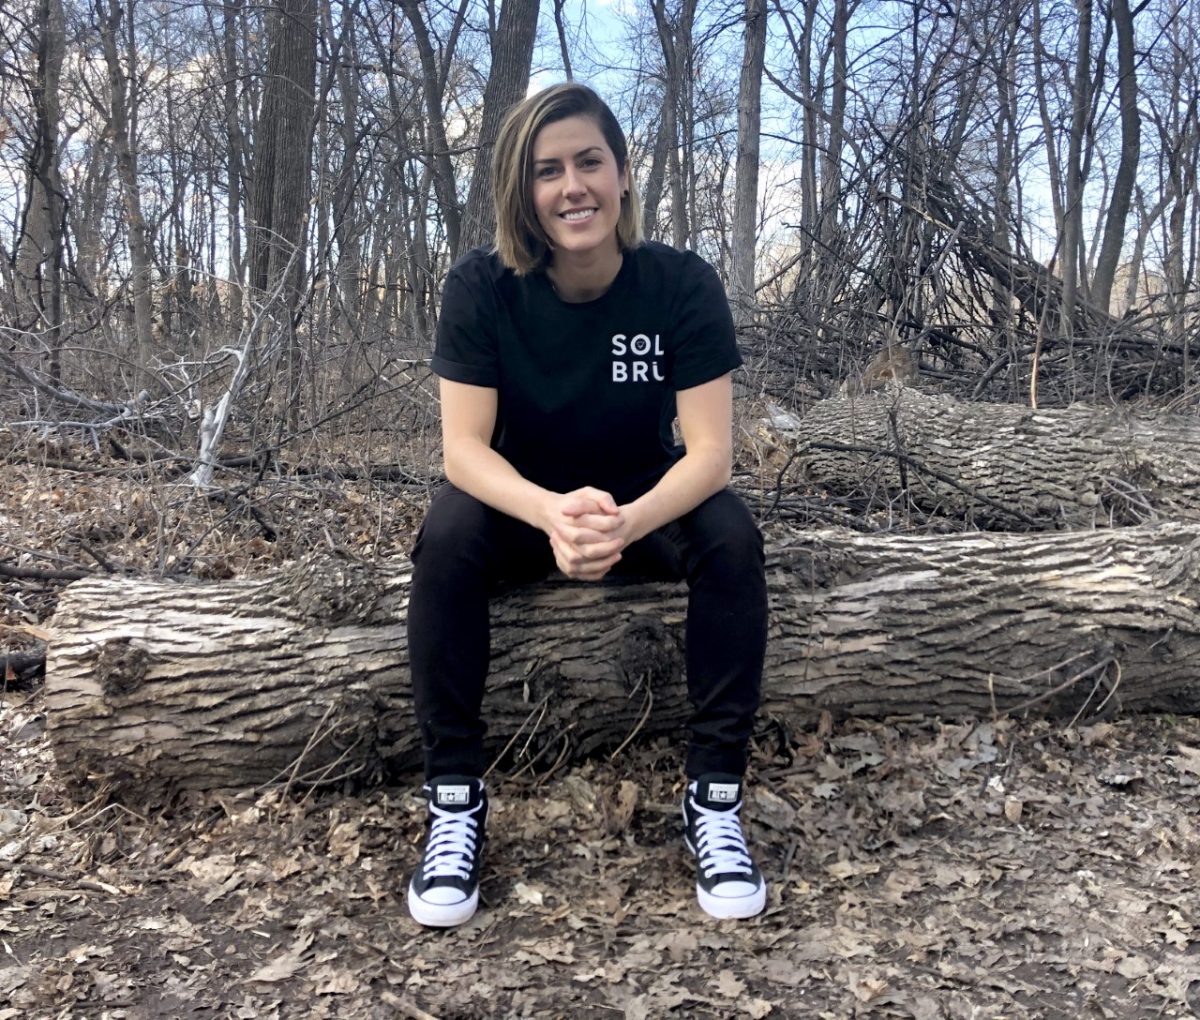 Asper alum Leanne Kisil wearing all black sitting on a log in the forest smiling.